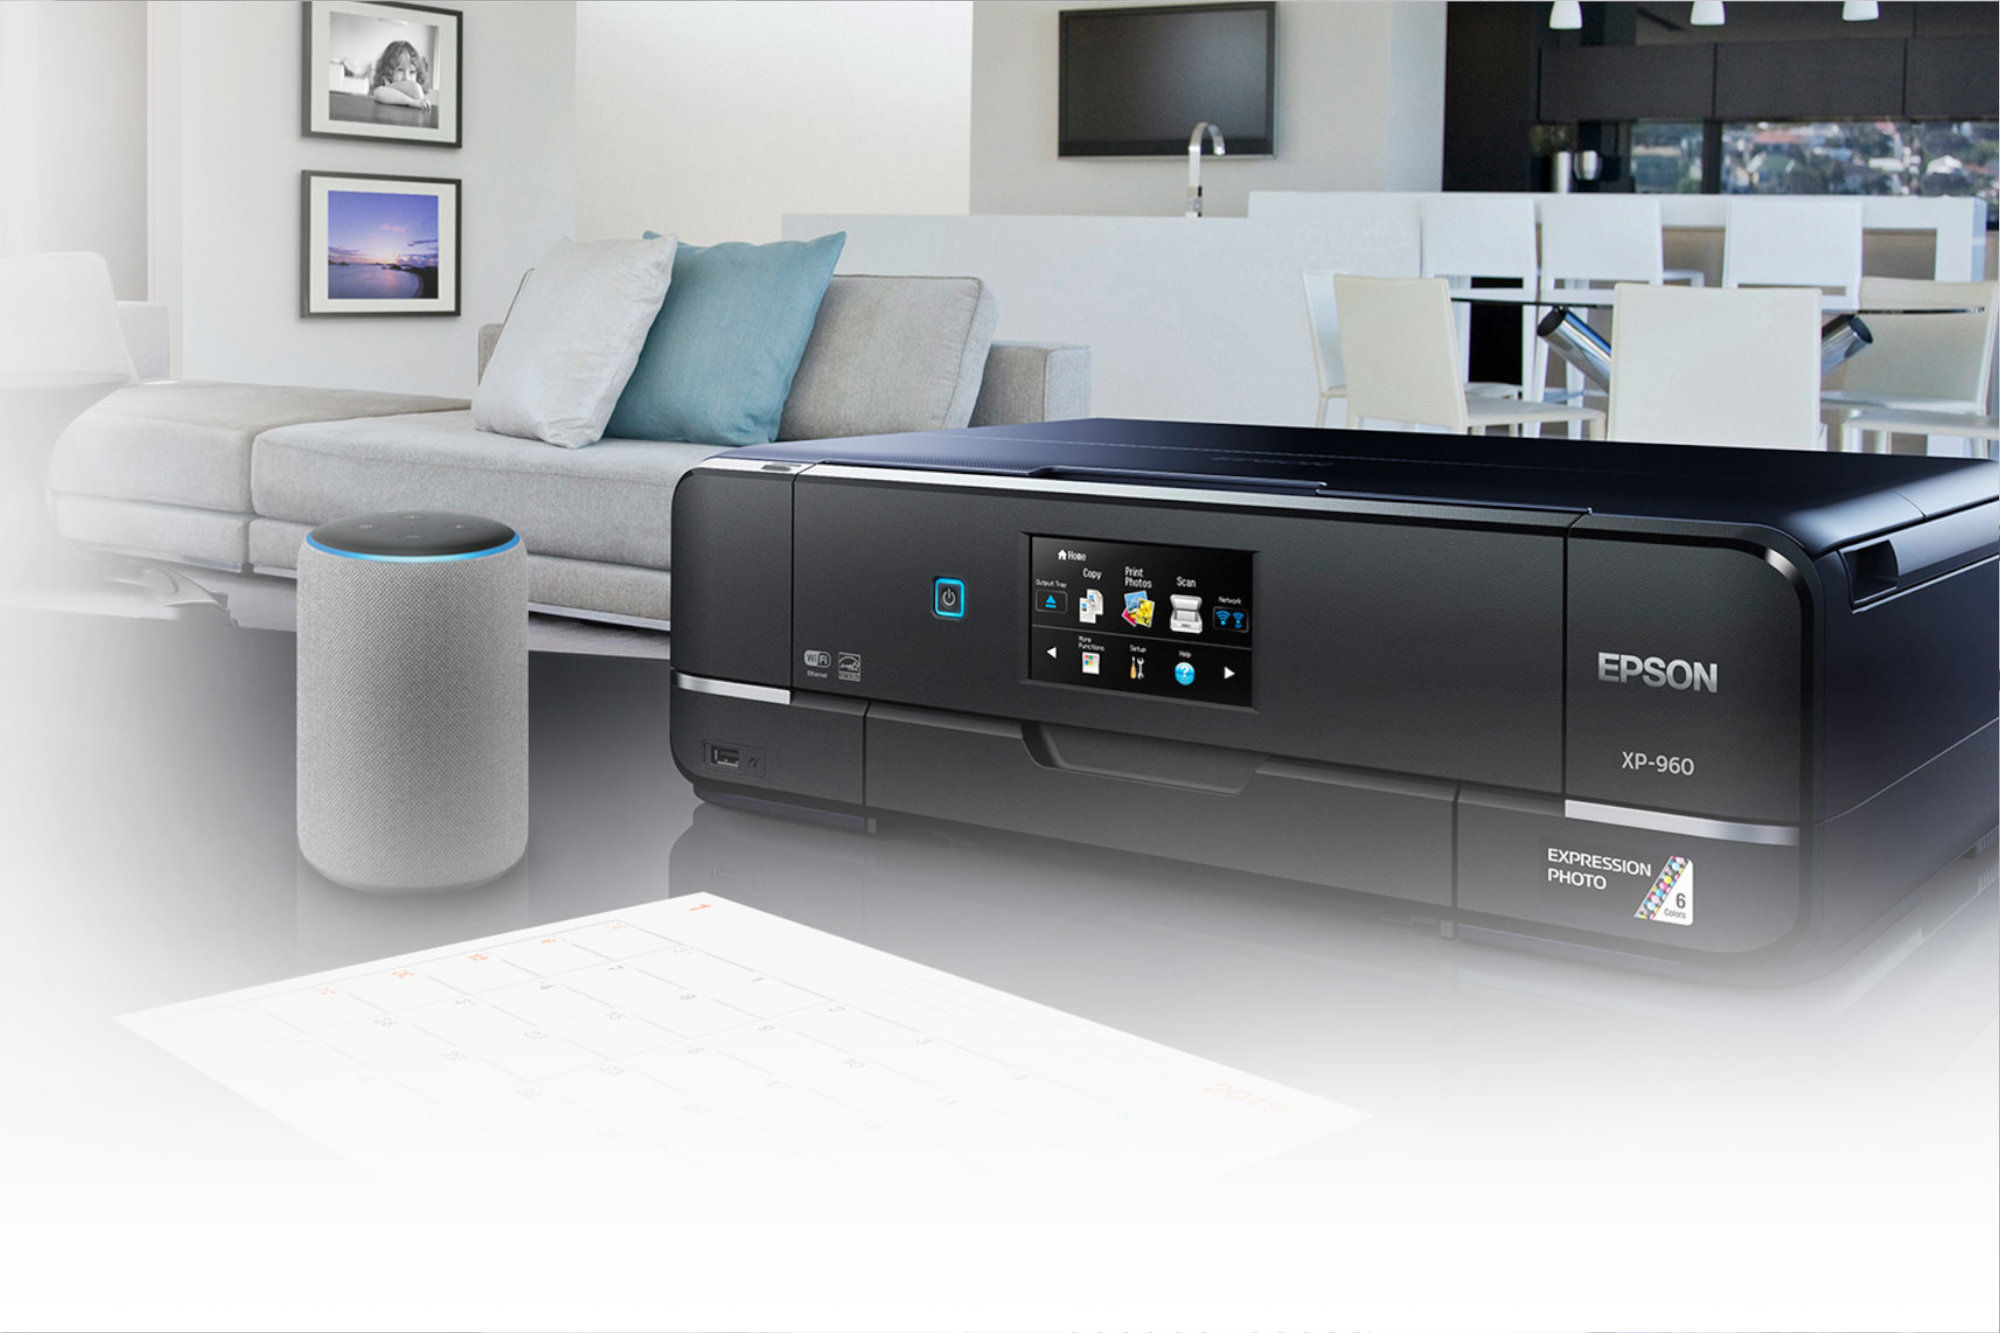 Epson says you can use Alexa for voice-activated printing.